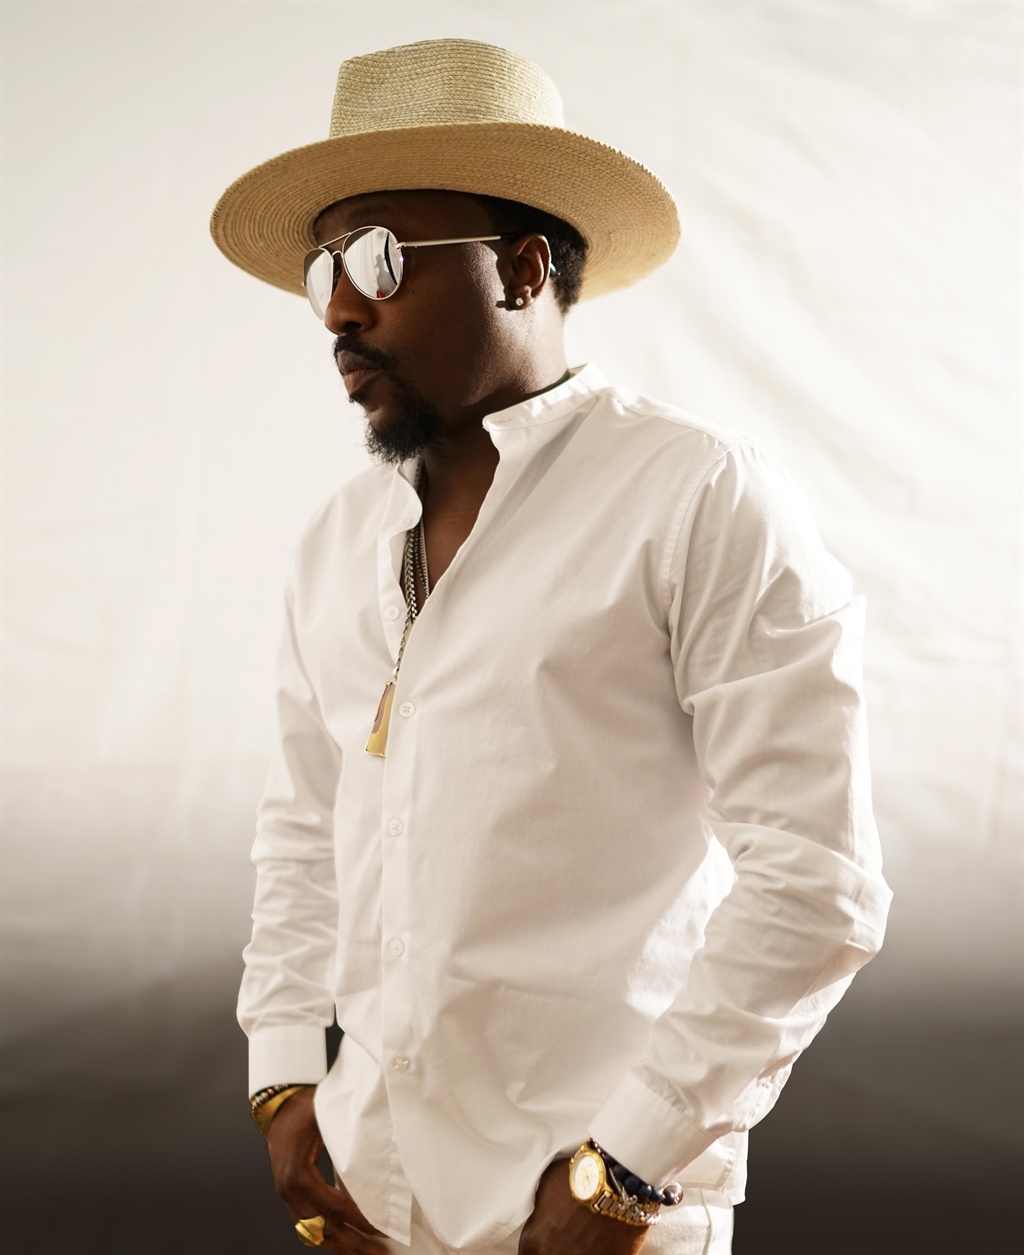 Legendary singer, Anthony Hamilton will have two nights to wow fans in Mzansi. Photo: LaVan Anderson